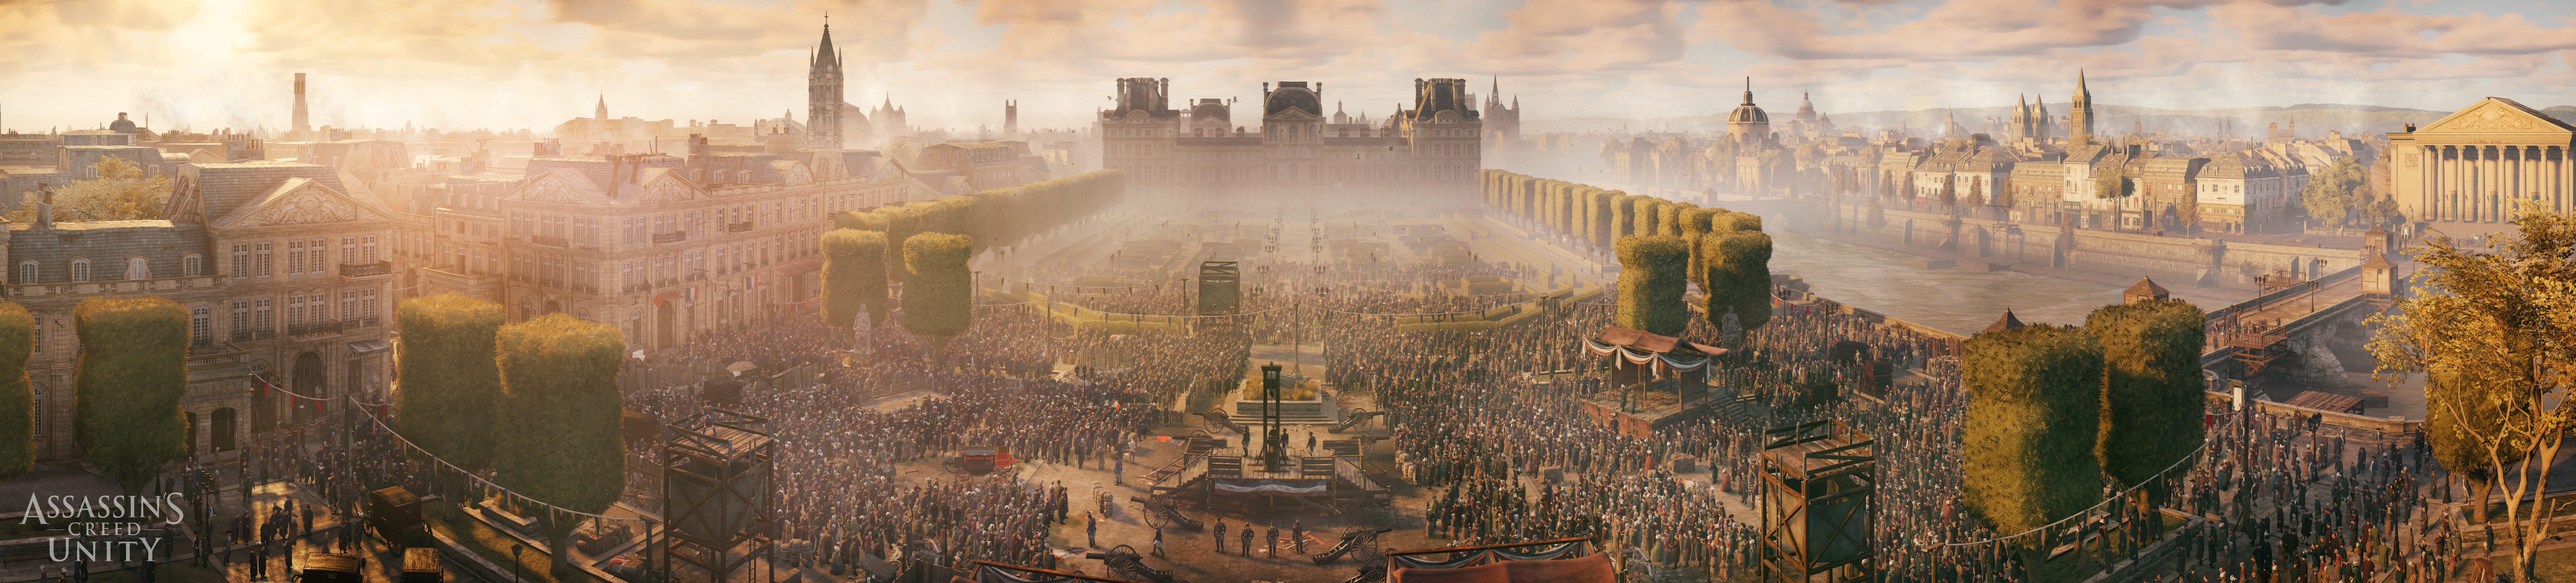 assassin's creed, assassin's creed: unity, video game Panoramic Wallpaper